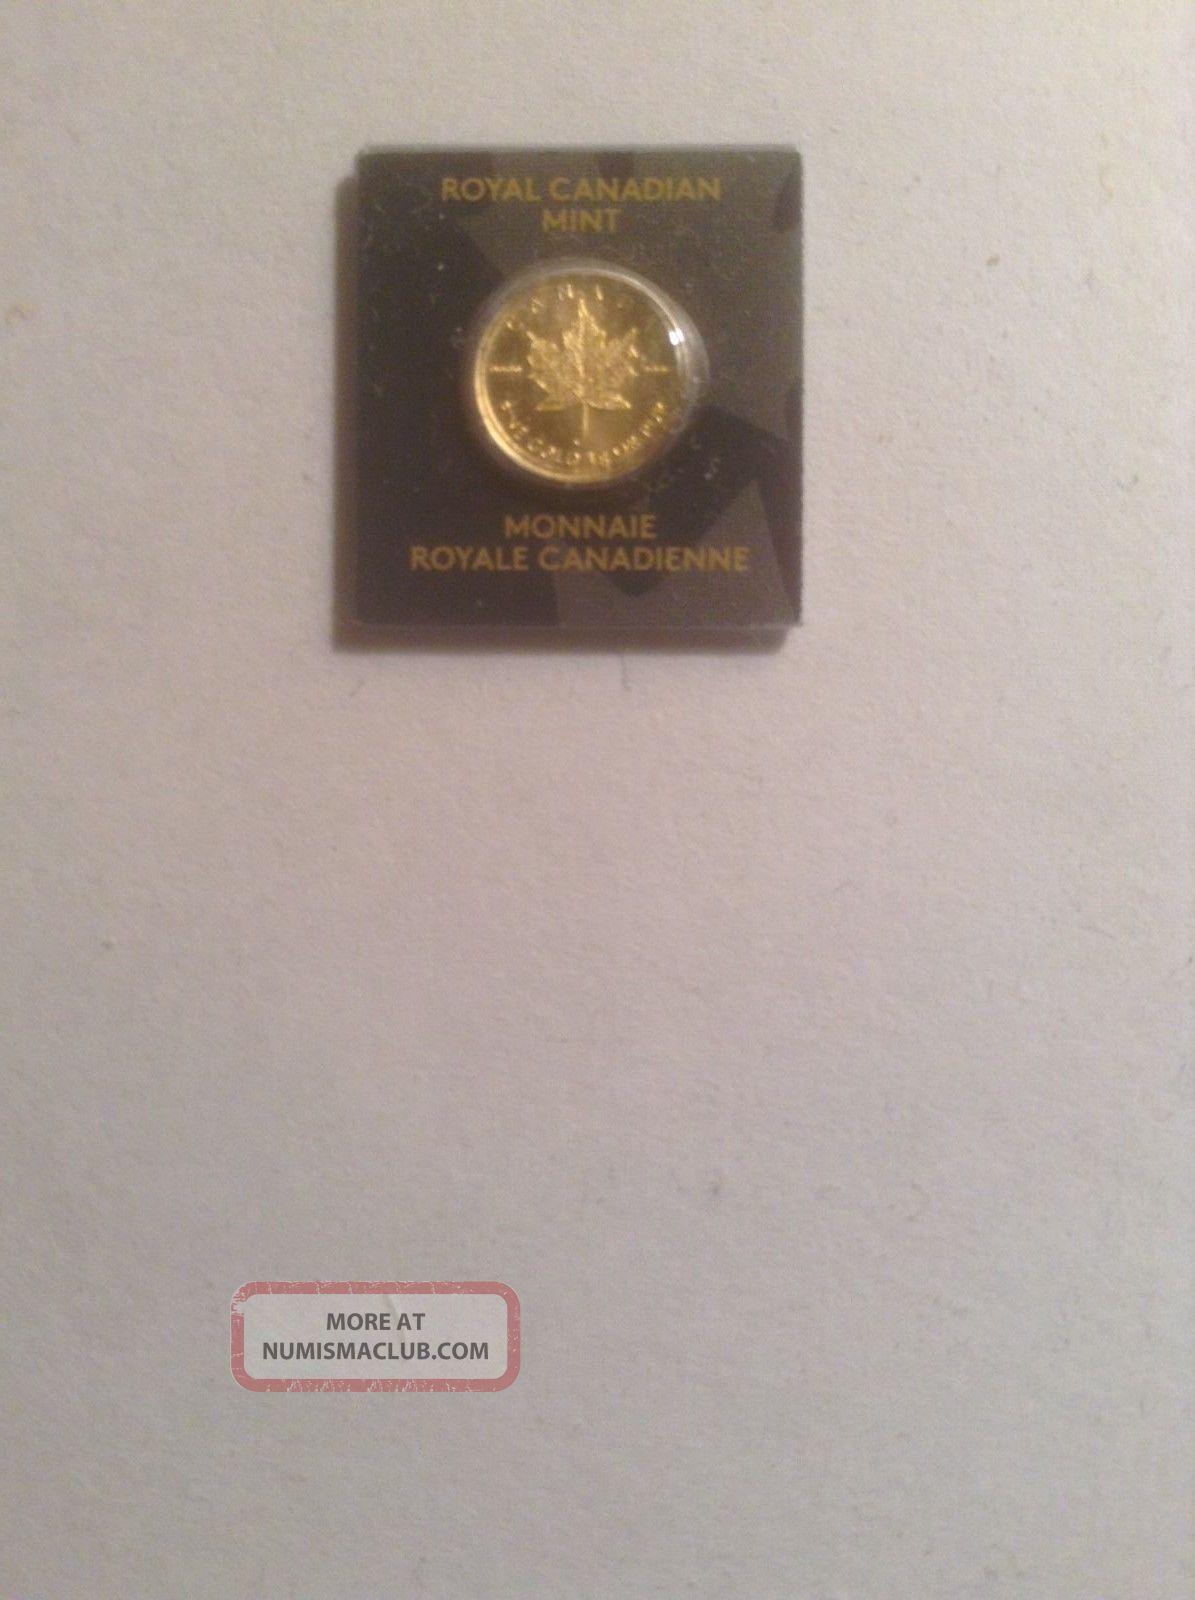 gold maple leaf coin price